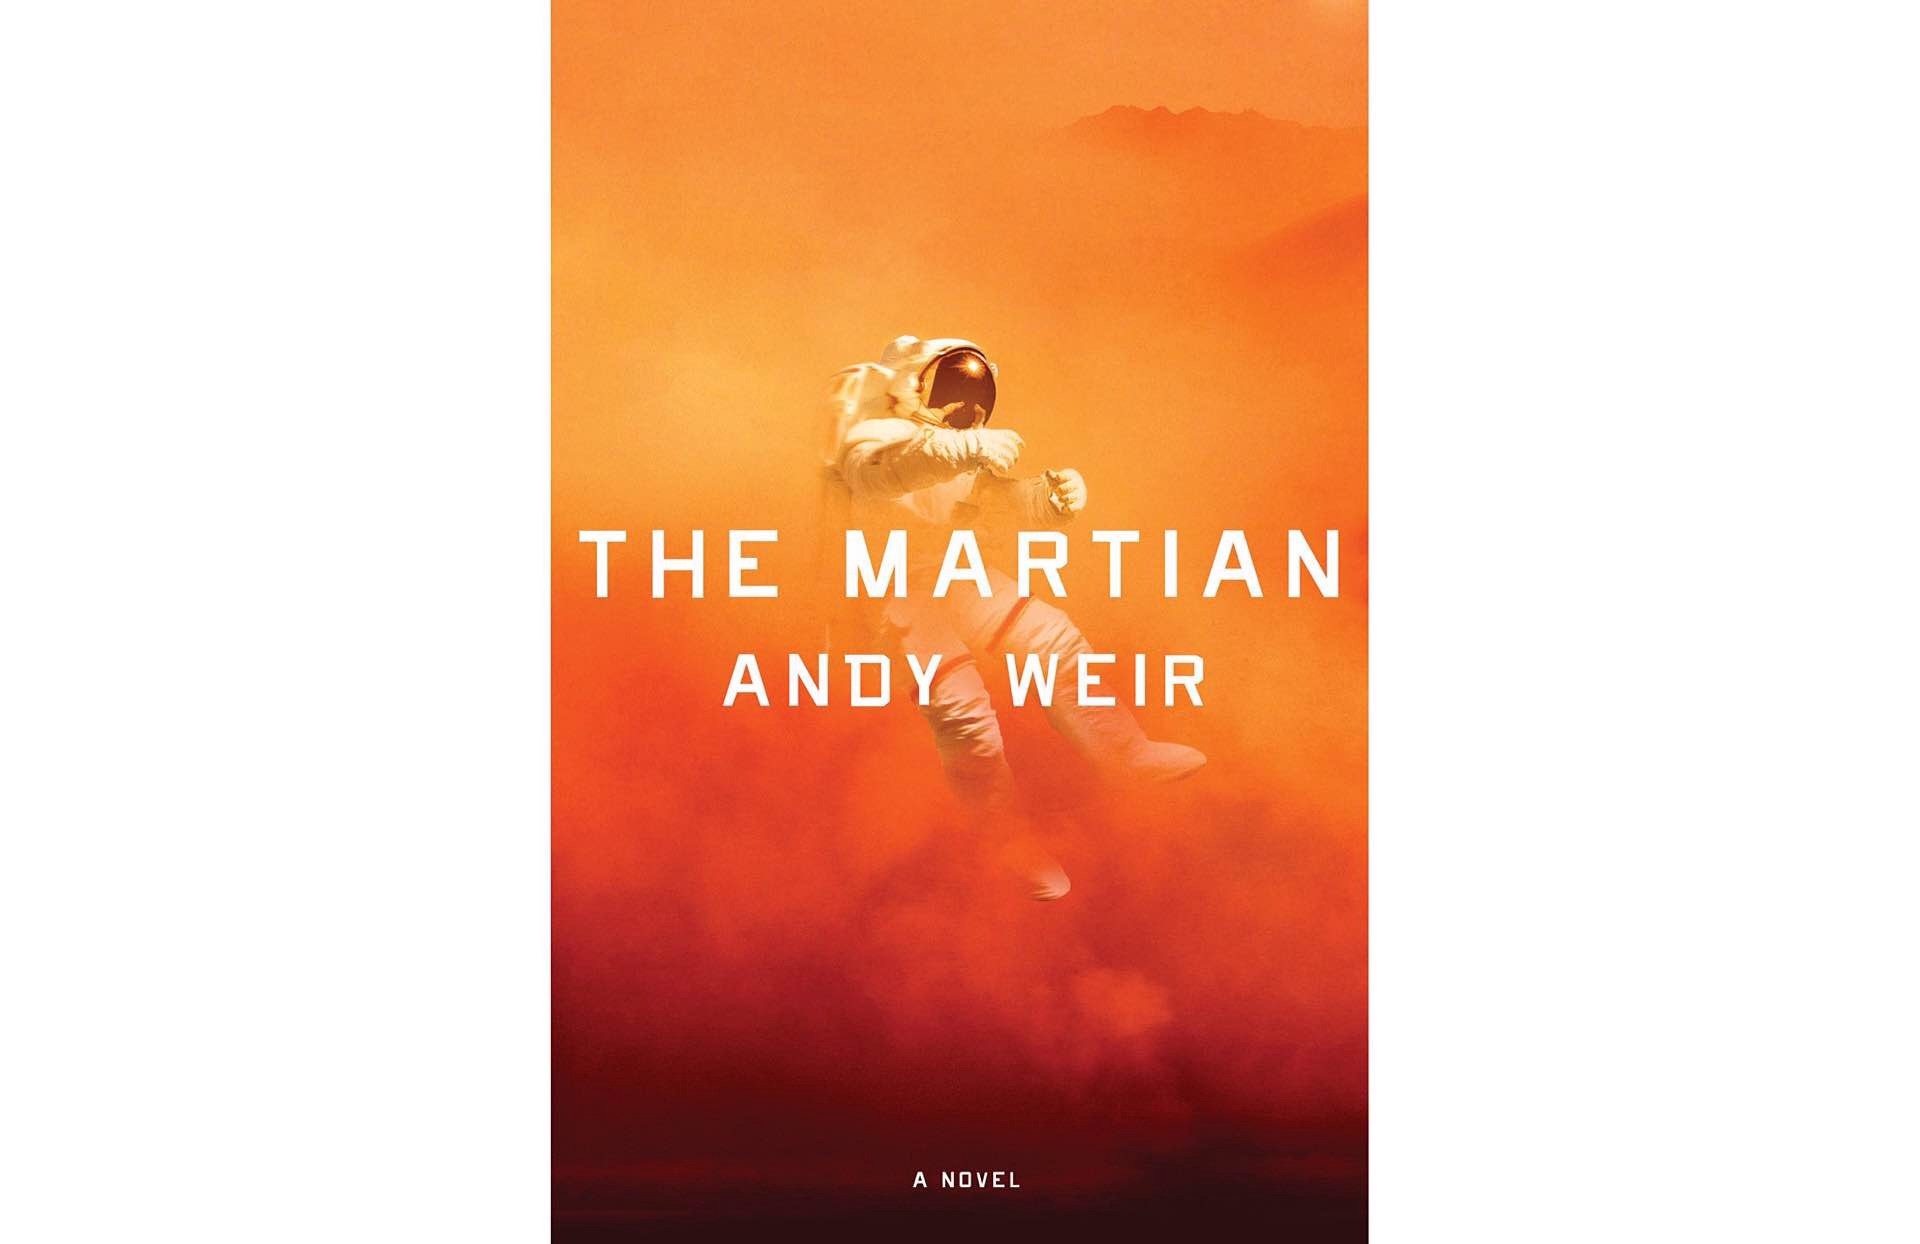 The Martian by Andy Weir.